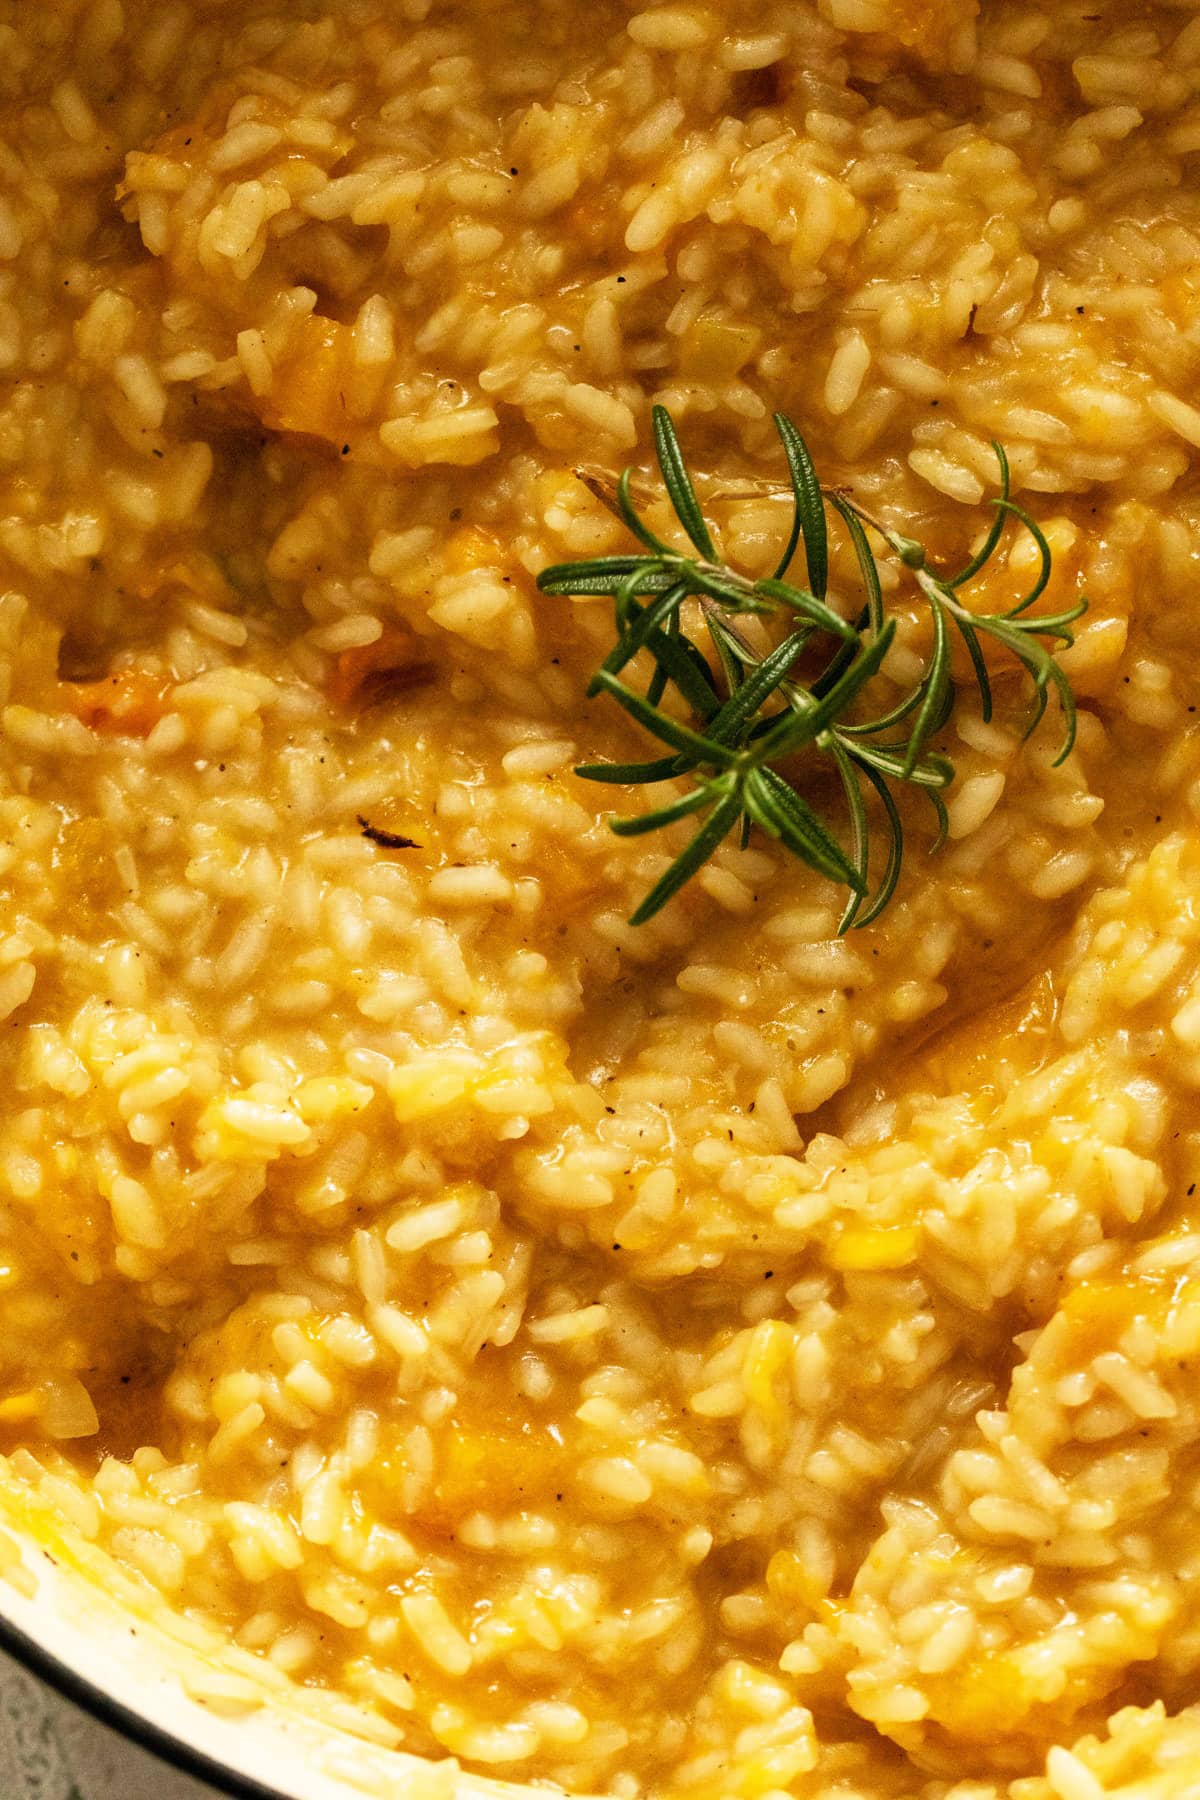 close up creamy and orange pumpkin risotto with rosemary on top.